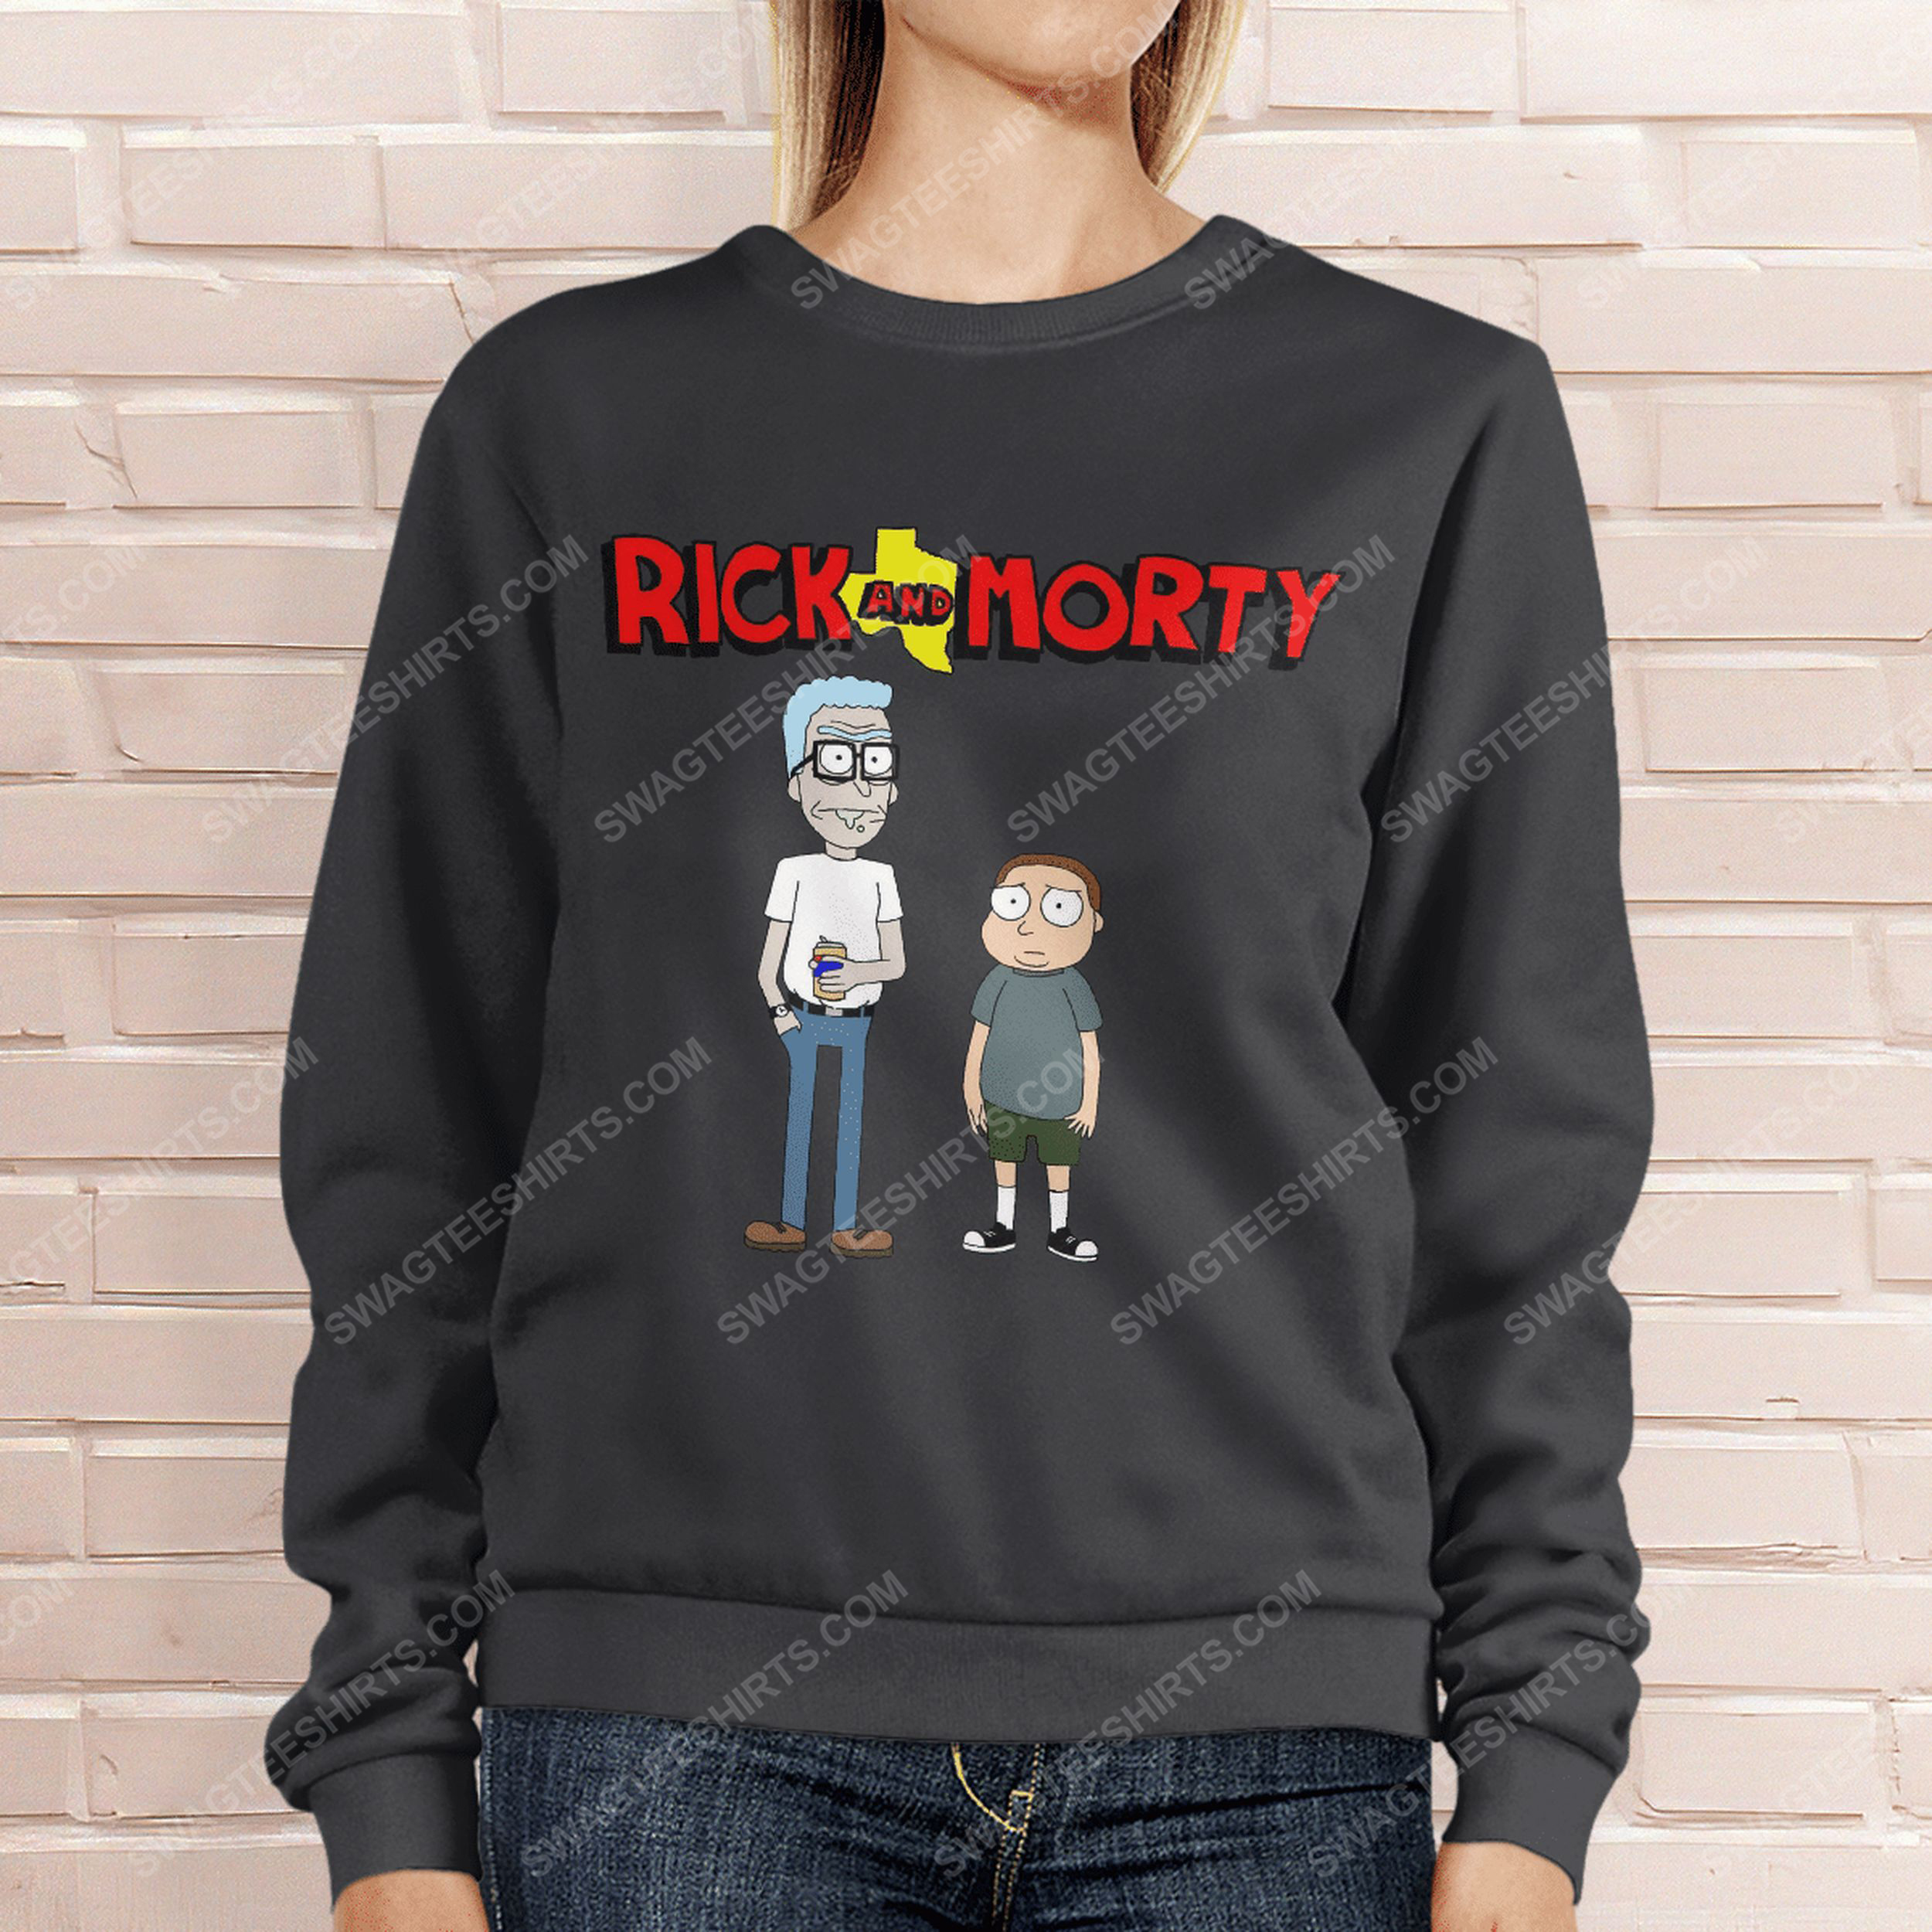 Tv show rick and morty and king of the hill sweatshirt 1(1)